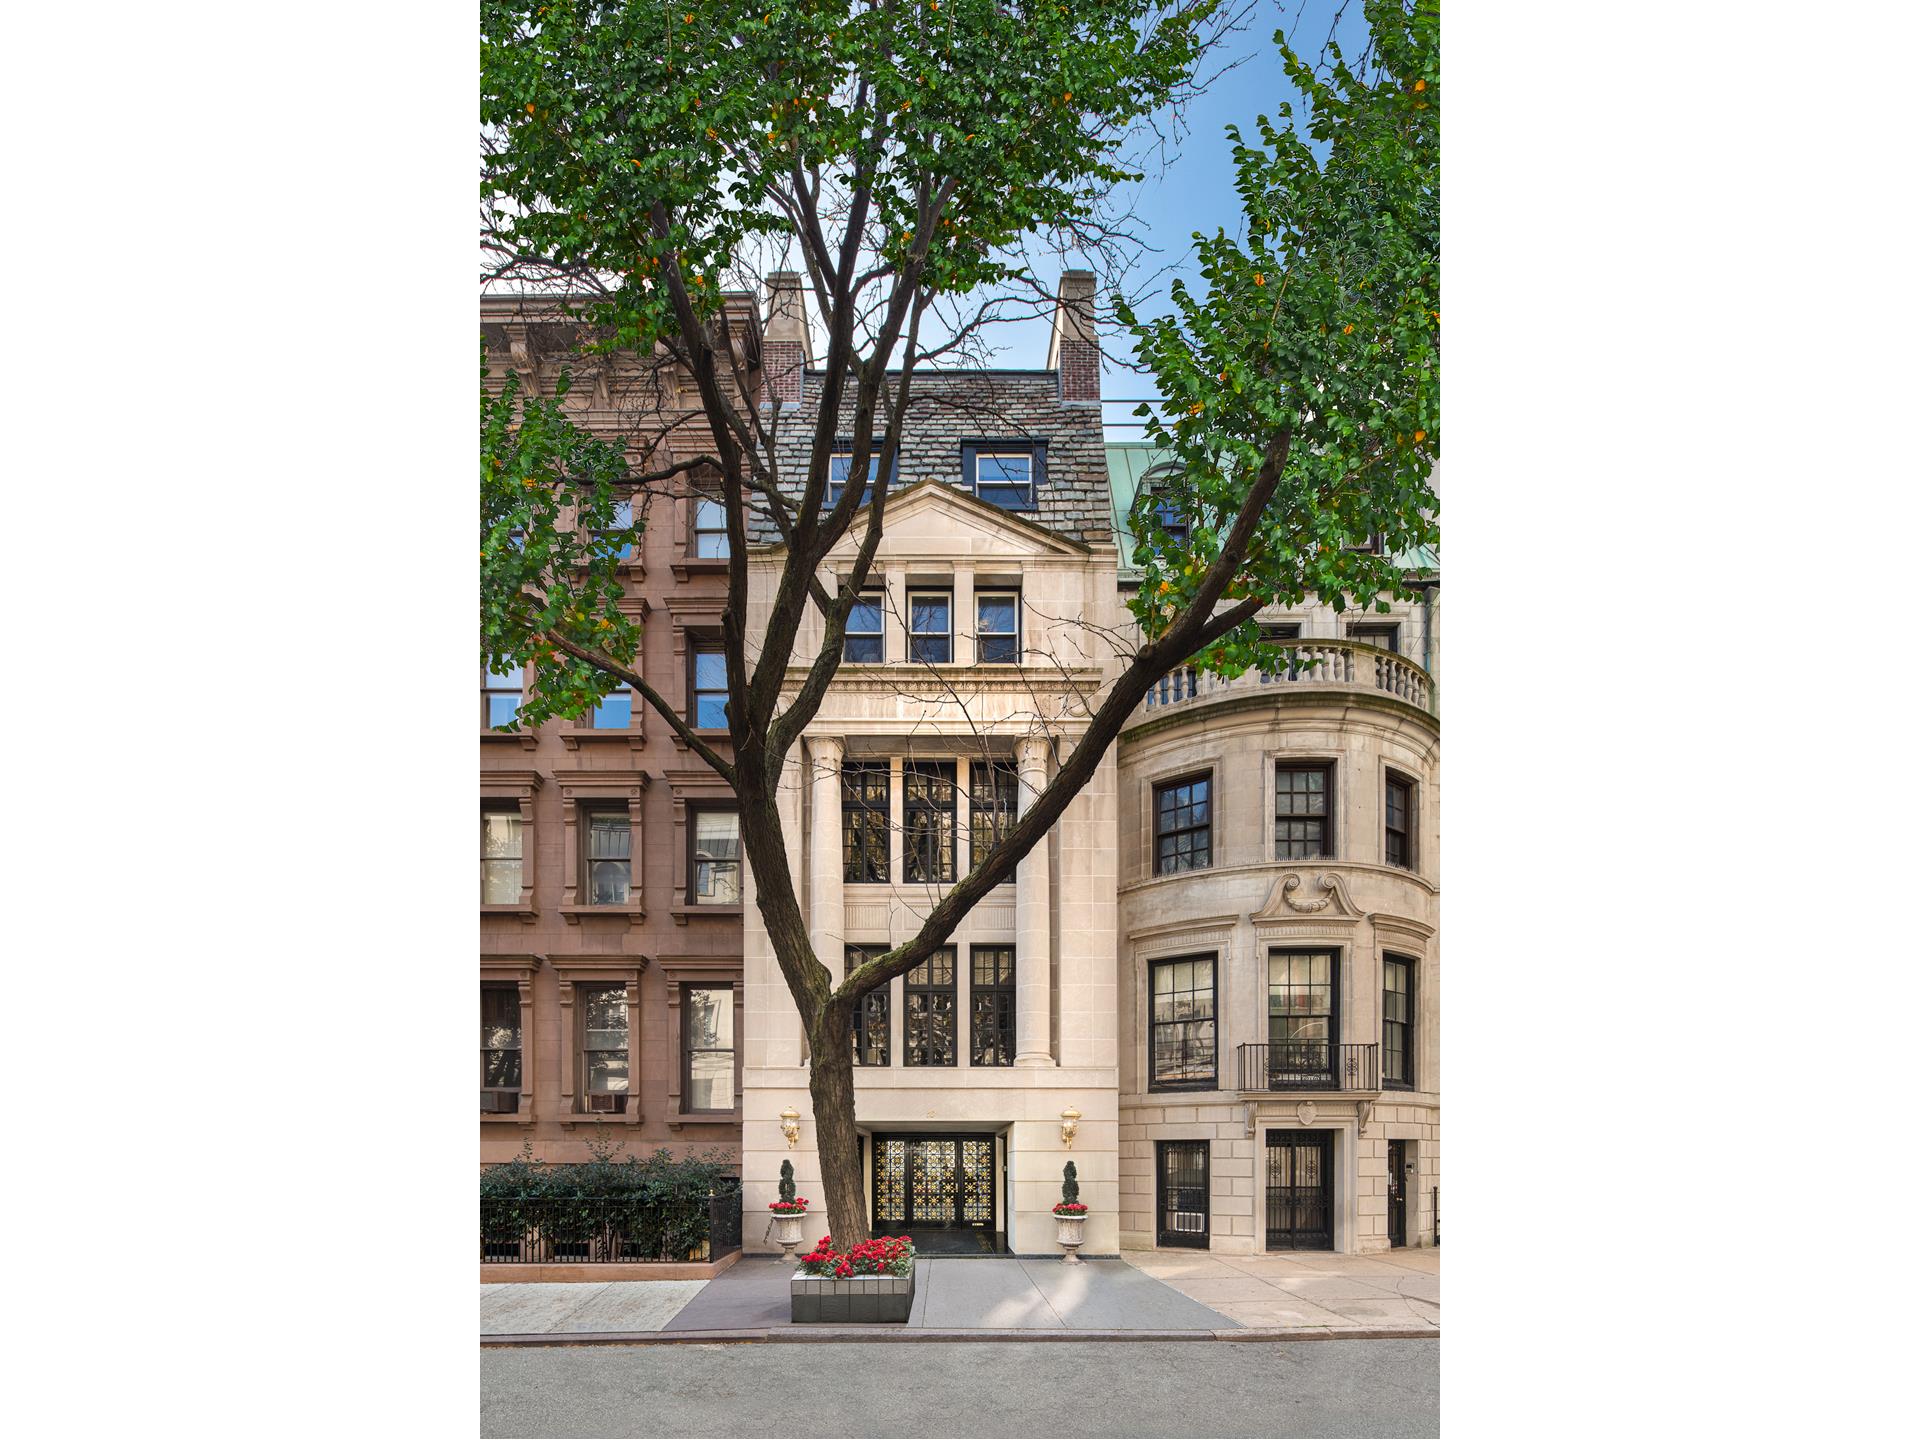 10 East 64th Street, Lenox Hill, Upper East Side, NYC - 5 Bedrooms  
6 Bathrooms  
17 Rooms - 